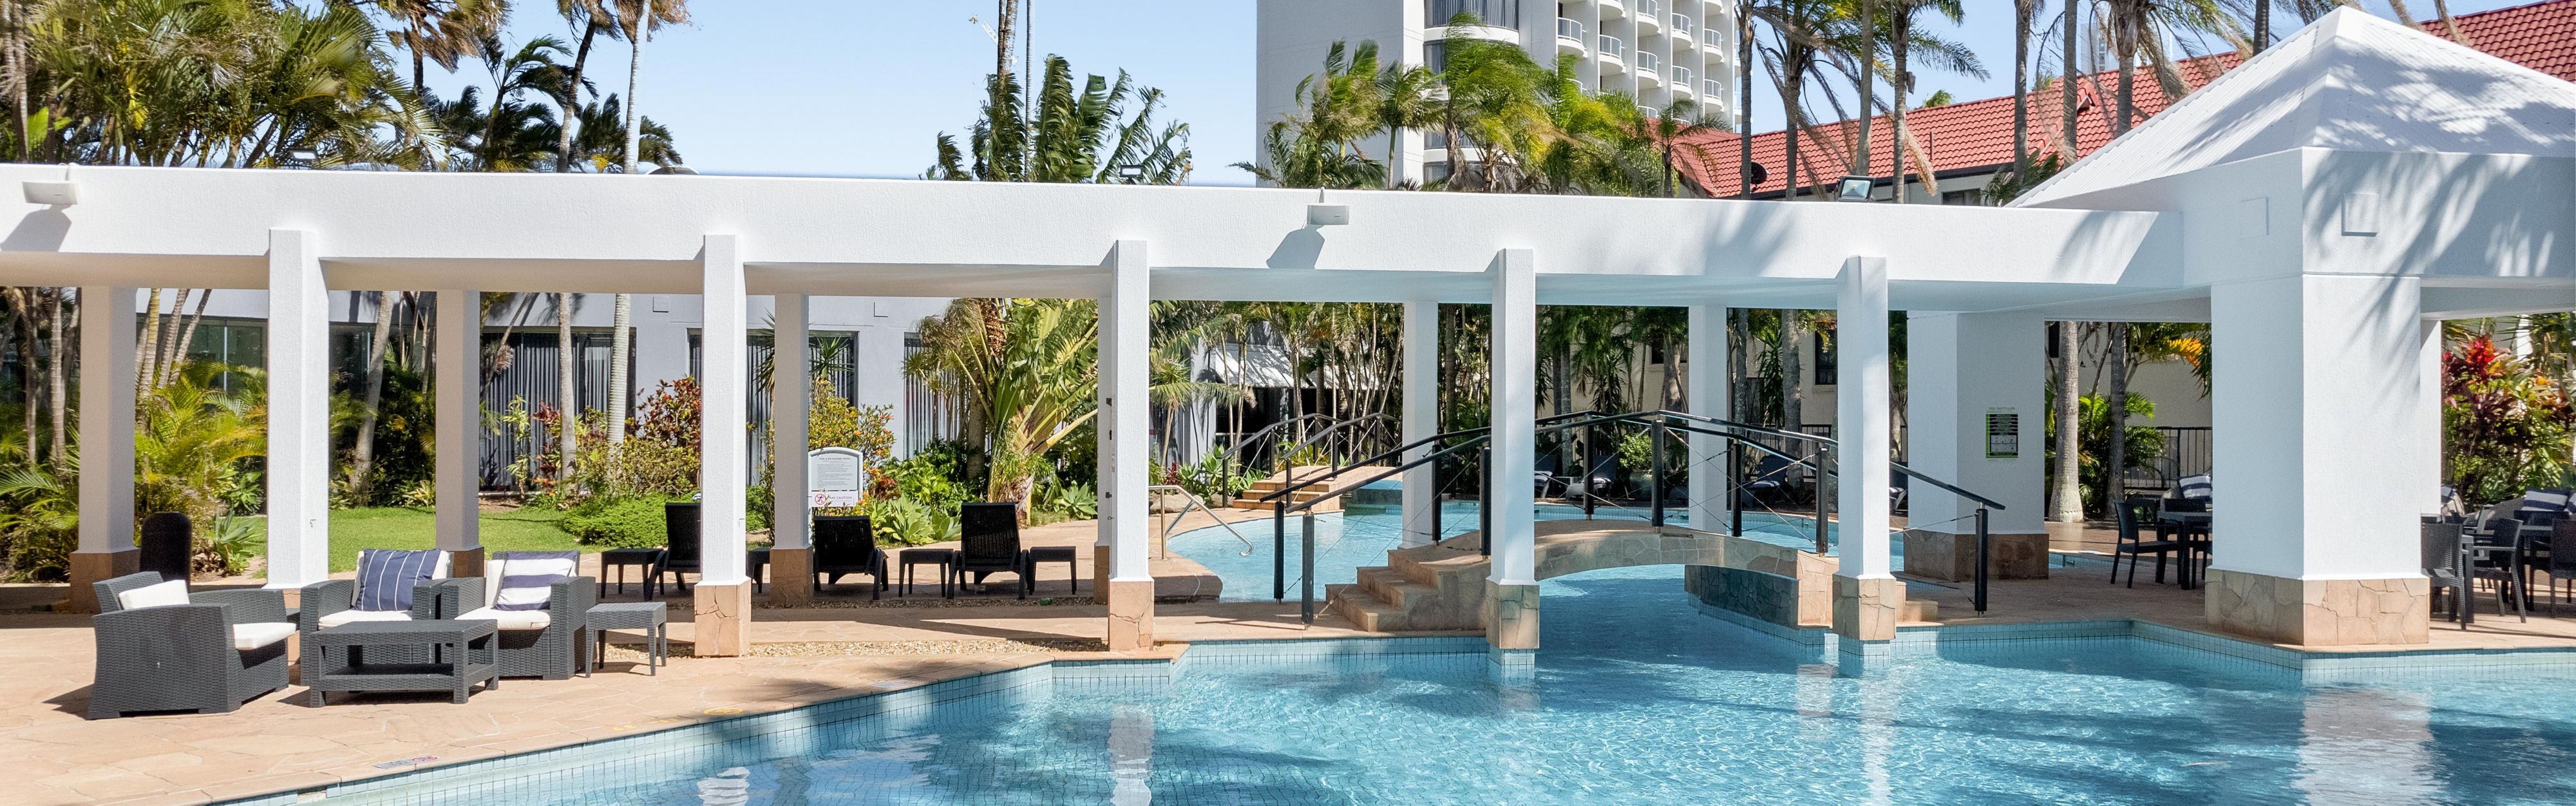 Take a dip in our lagoon style pool